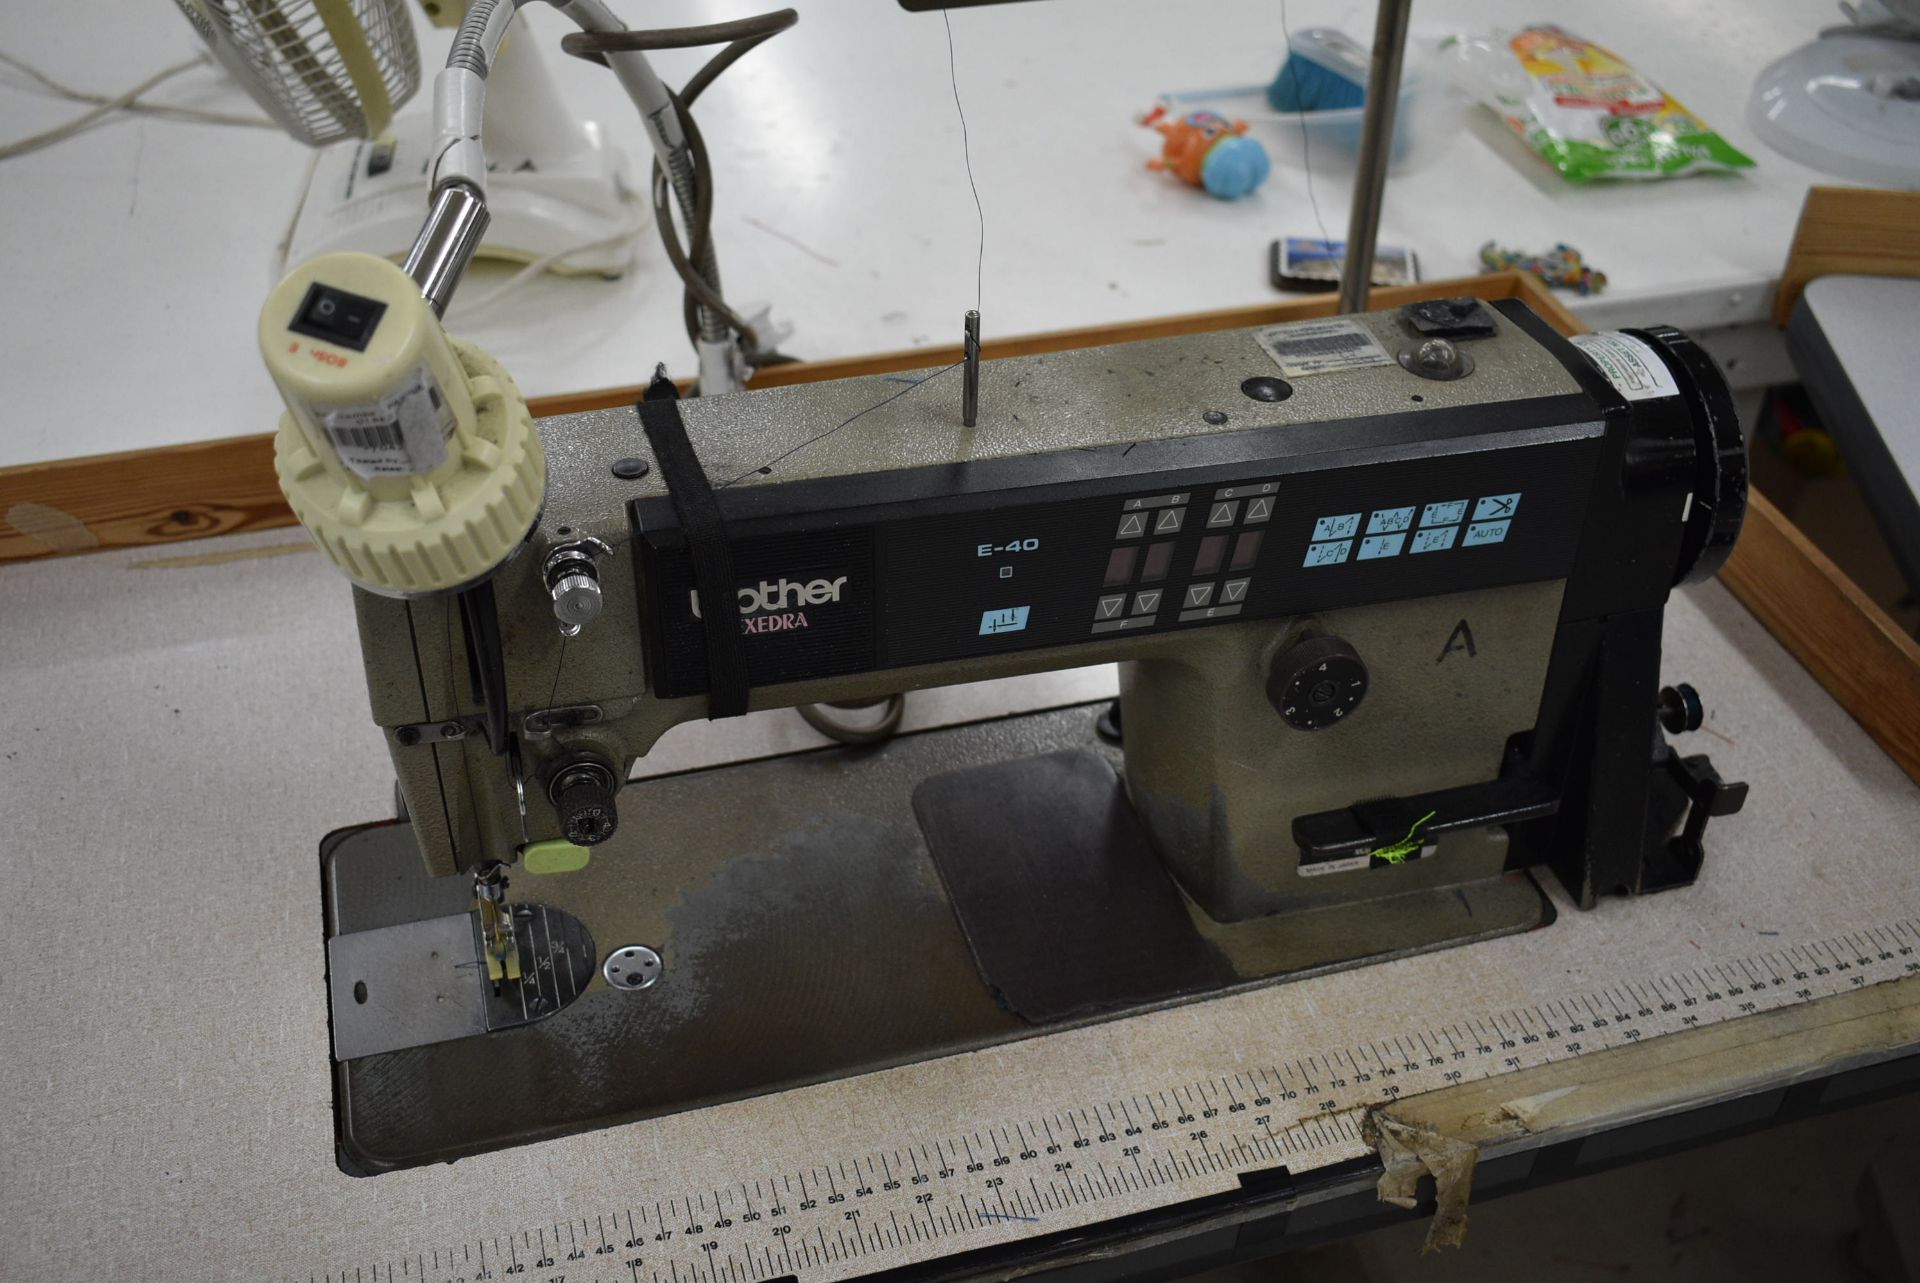 Brother EXEDRA E-40 DB2-B737-413 MARK II SINGLE NEEDLE FLAT BED SEWING MACHINE, serial no. E0547638, - Image 3 of 7